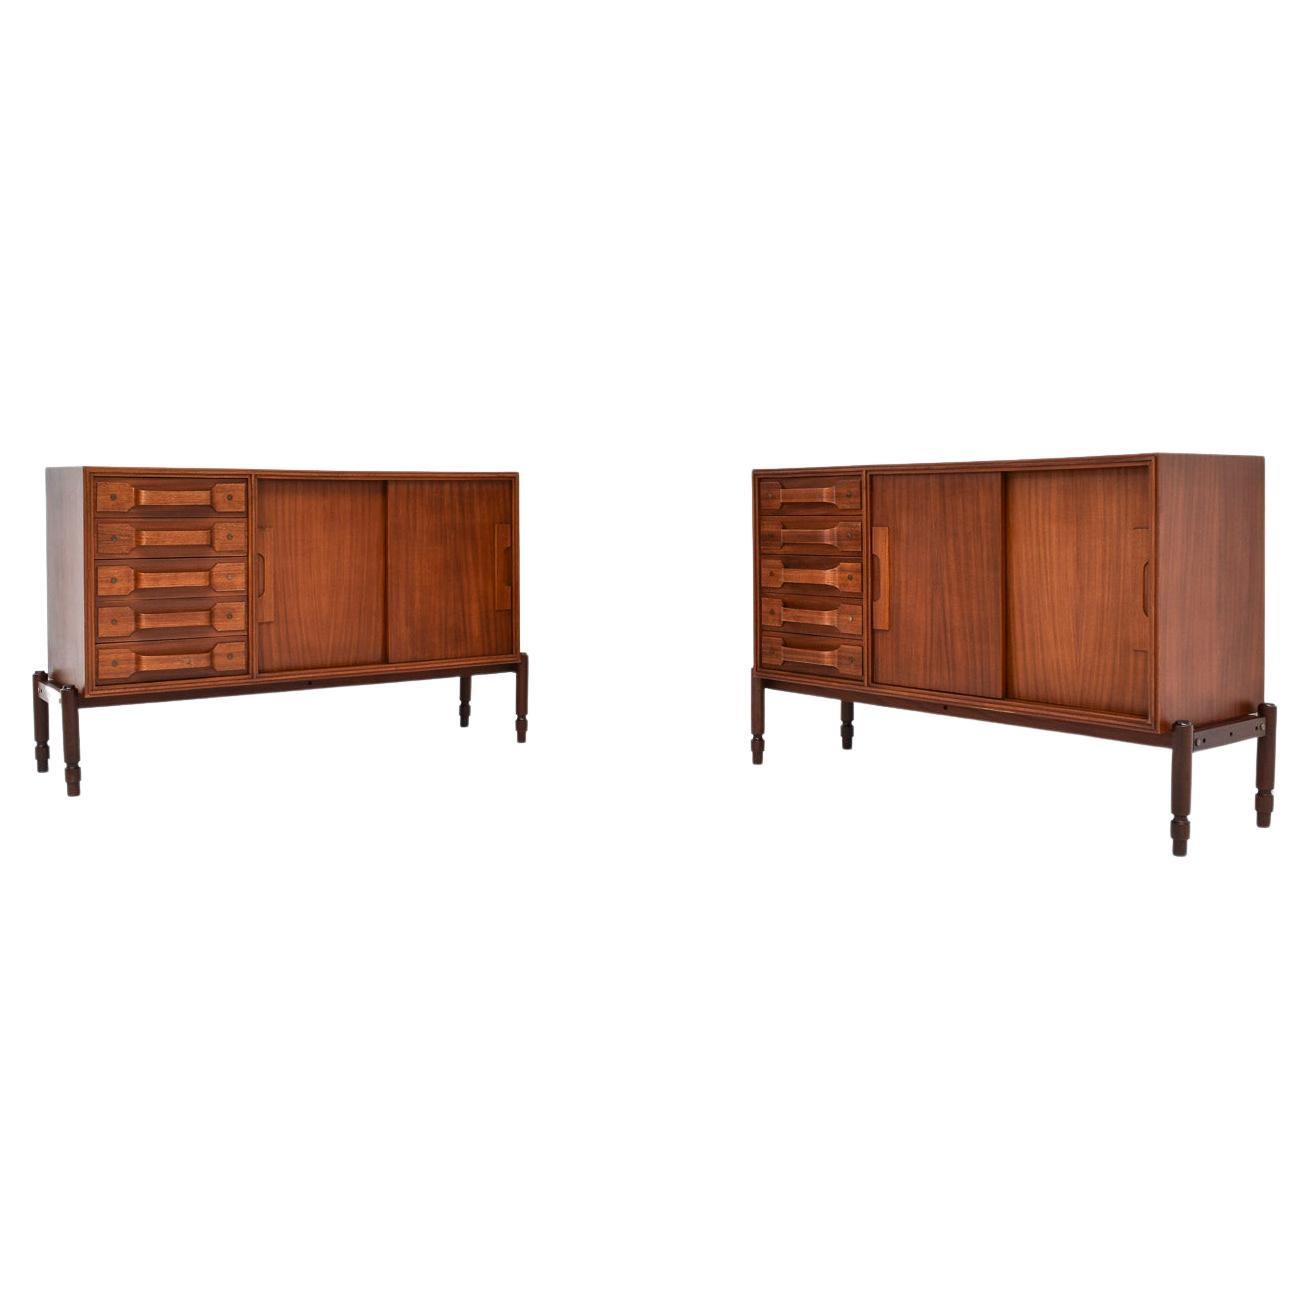 Rare Italian teak cabinet with rosewood legs by Guido Faleschini for Fratelli Longhi, 1950s. 
Very good original condition. 
  